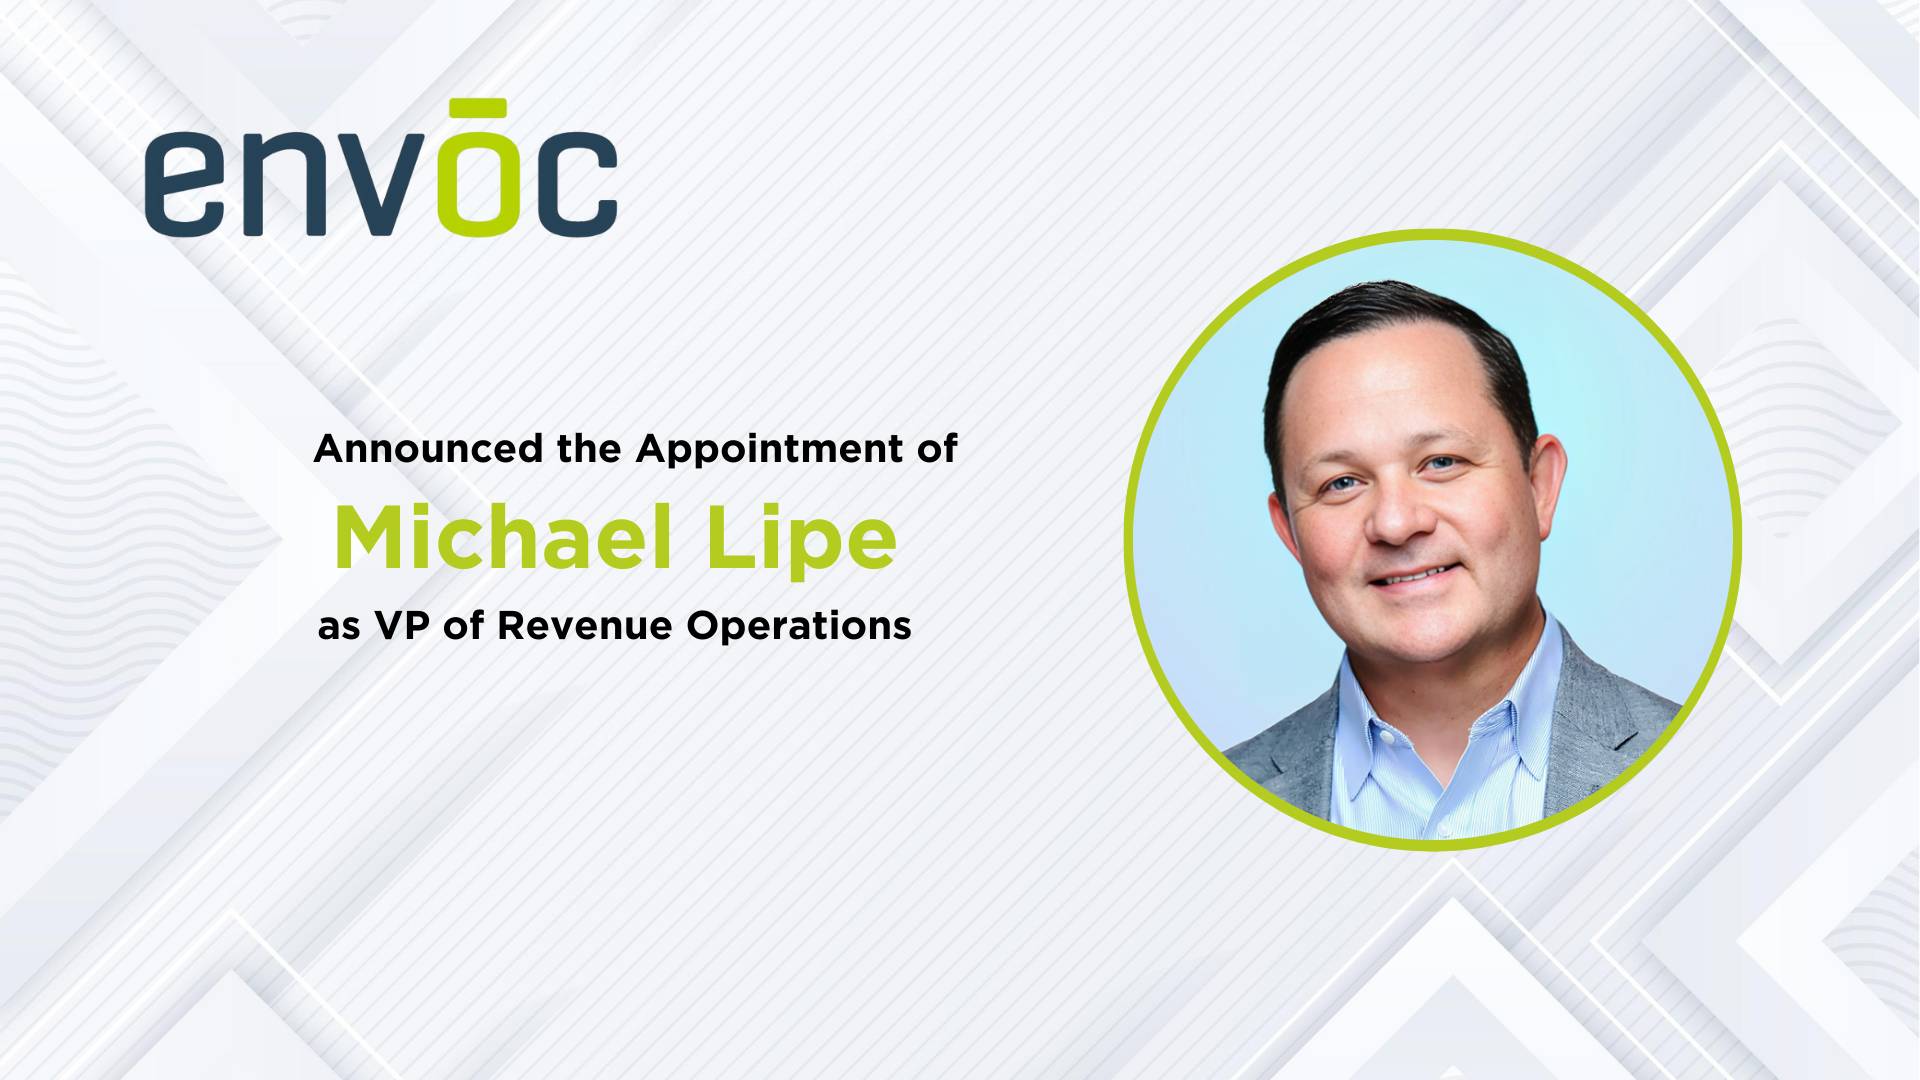 Envoc Appoints Michael Lipe as Vice President of Revenue Operations and Forms Strategic Partnership